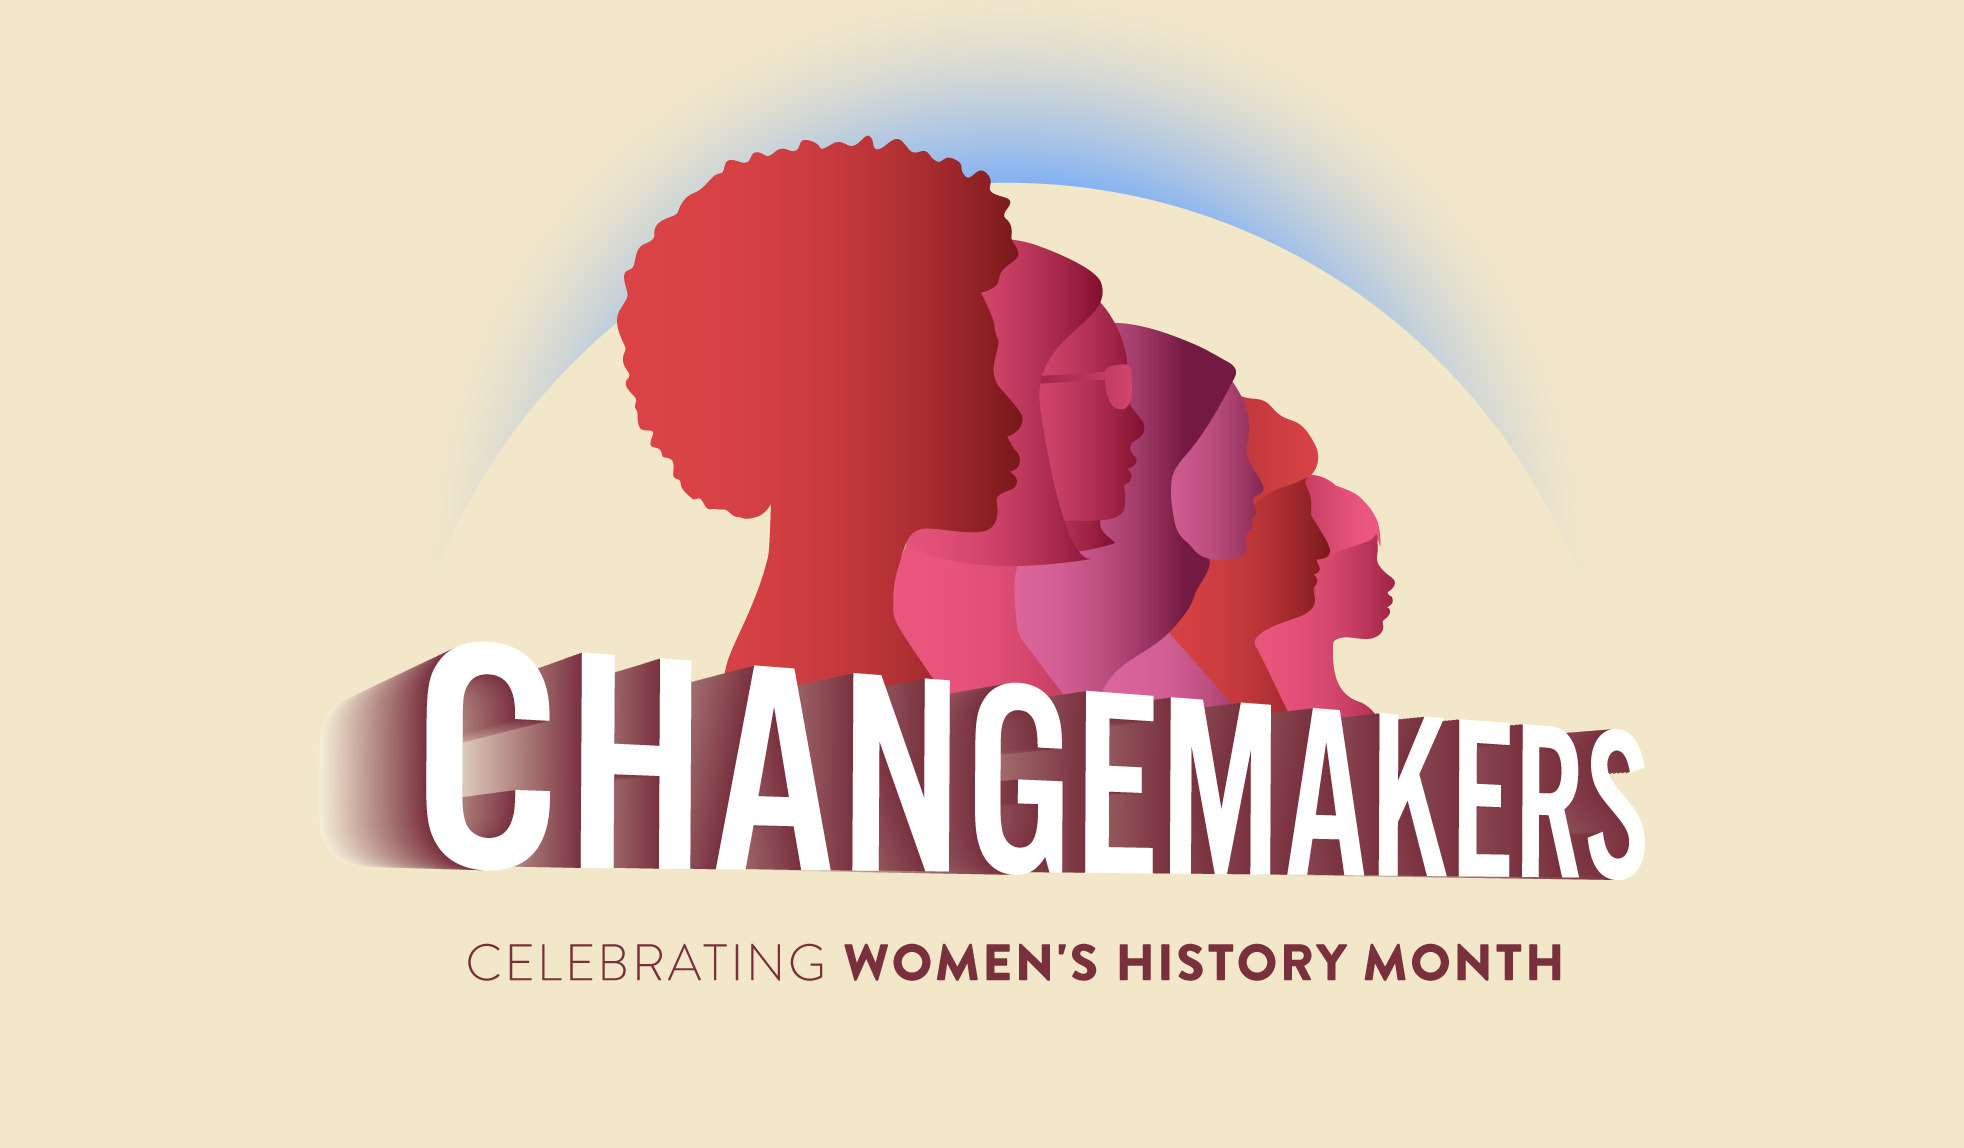 We're celebrating Changemakers, women who have been professional leaders and advocates for a more equitable world.